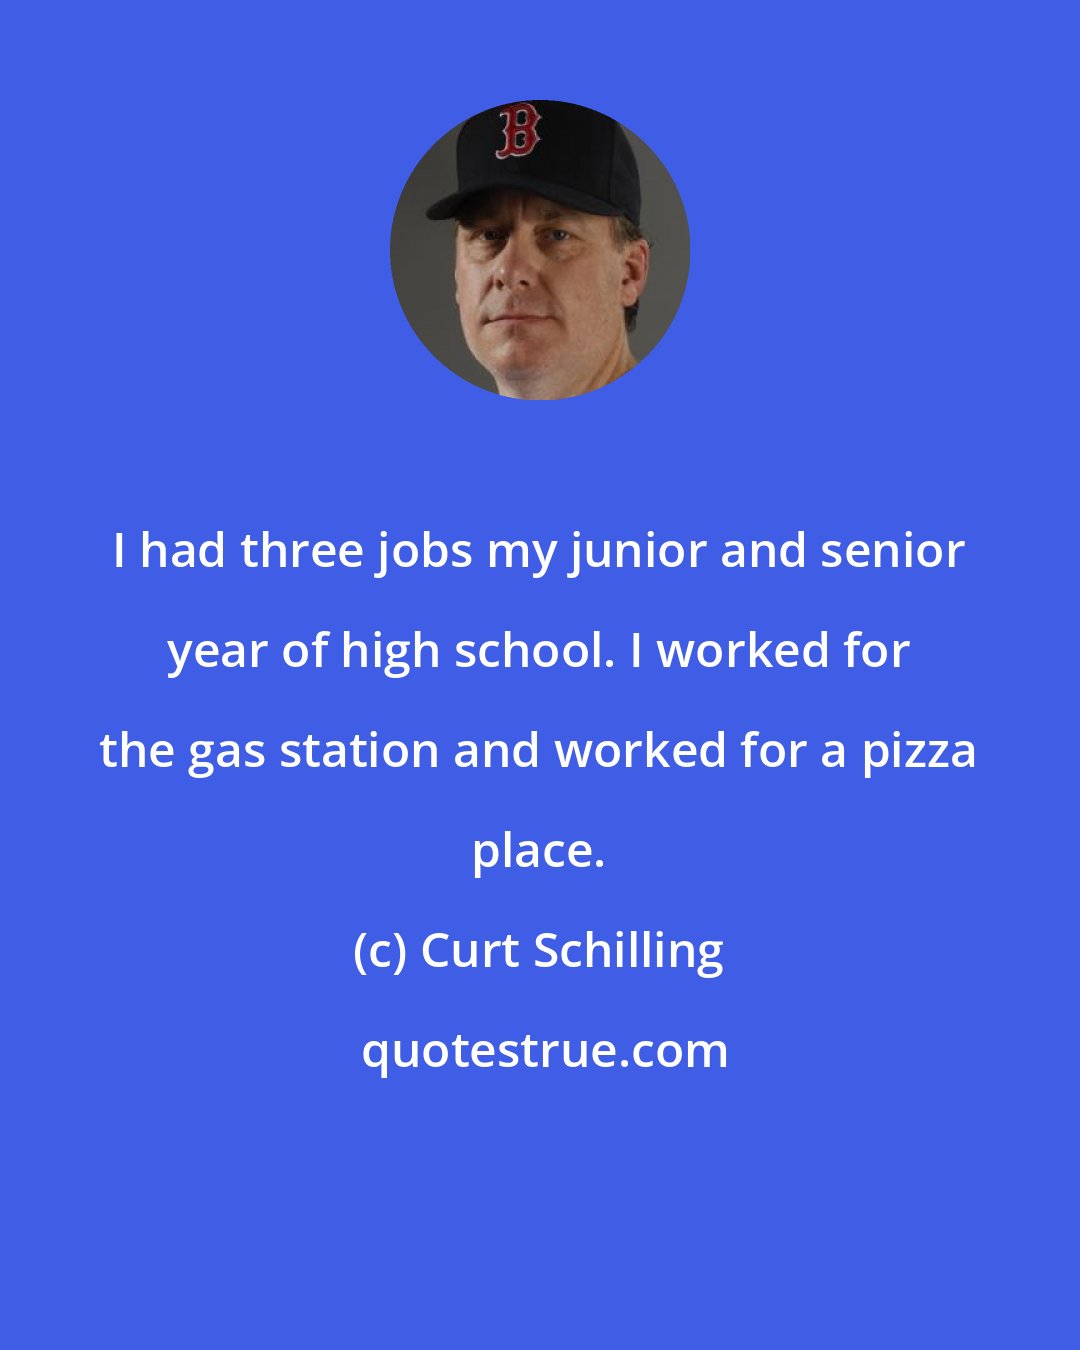 Curt Schilling: I had three jobs my junior and senior year of high school. I worked for the gas station and worked for a pizza place.